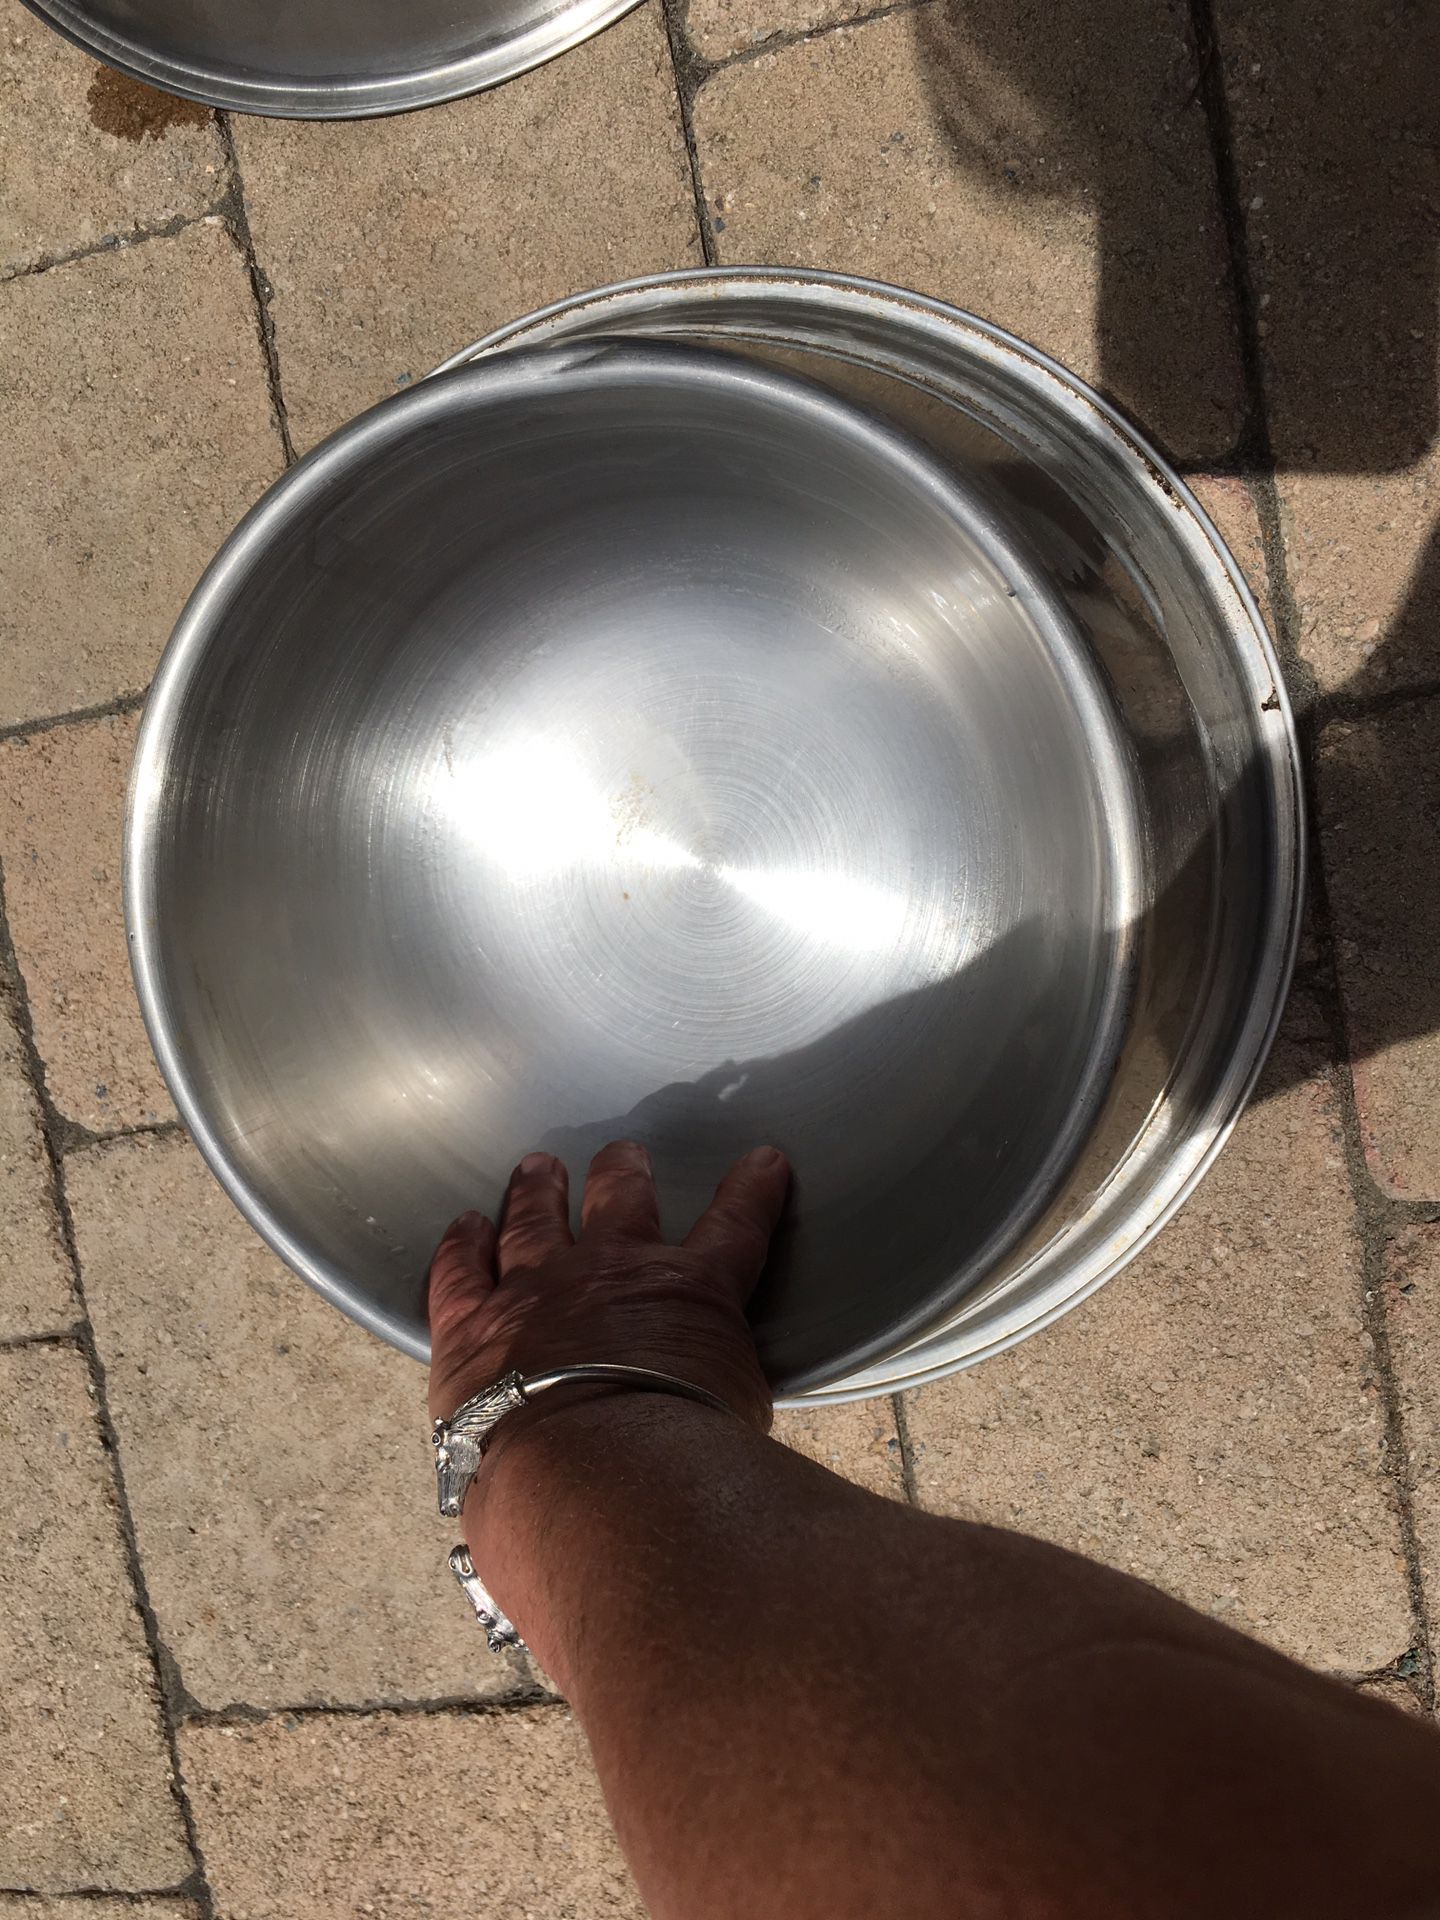 HEAVY DUTY STAINLESS STEEL NO TIP, DOG BOWL SIZE 8 CUPS, PACK OF 2